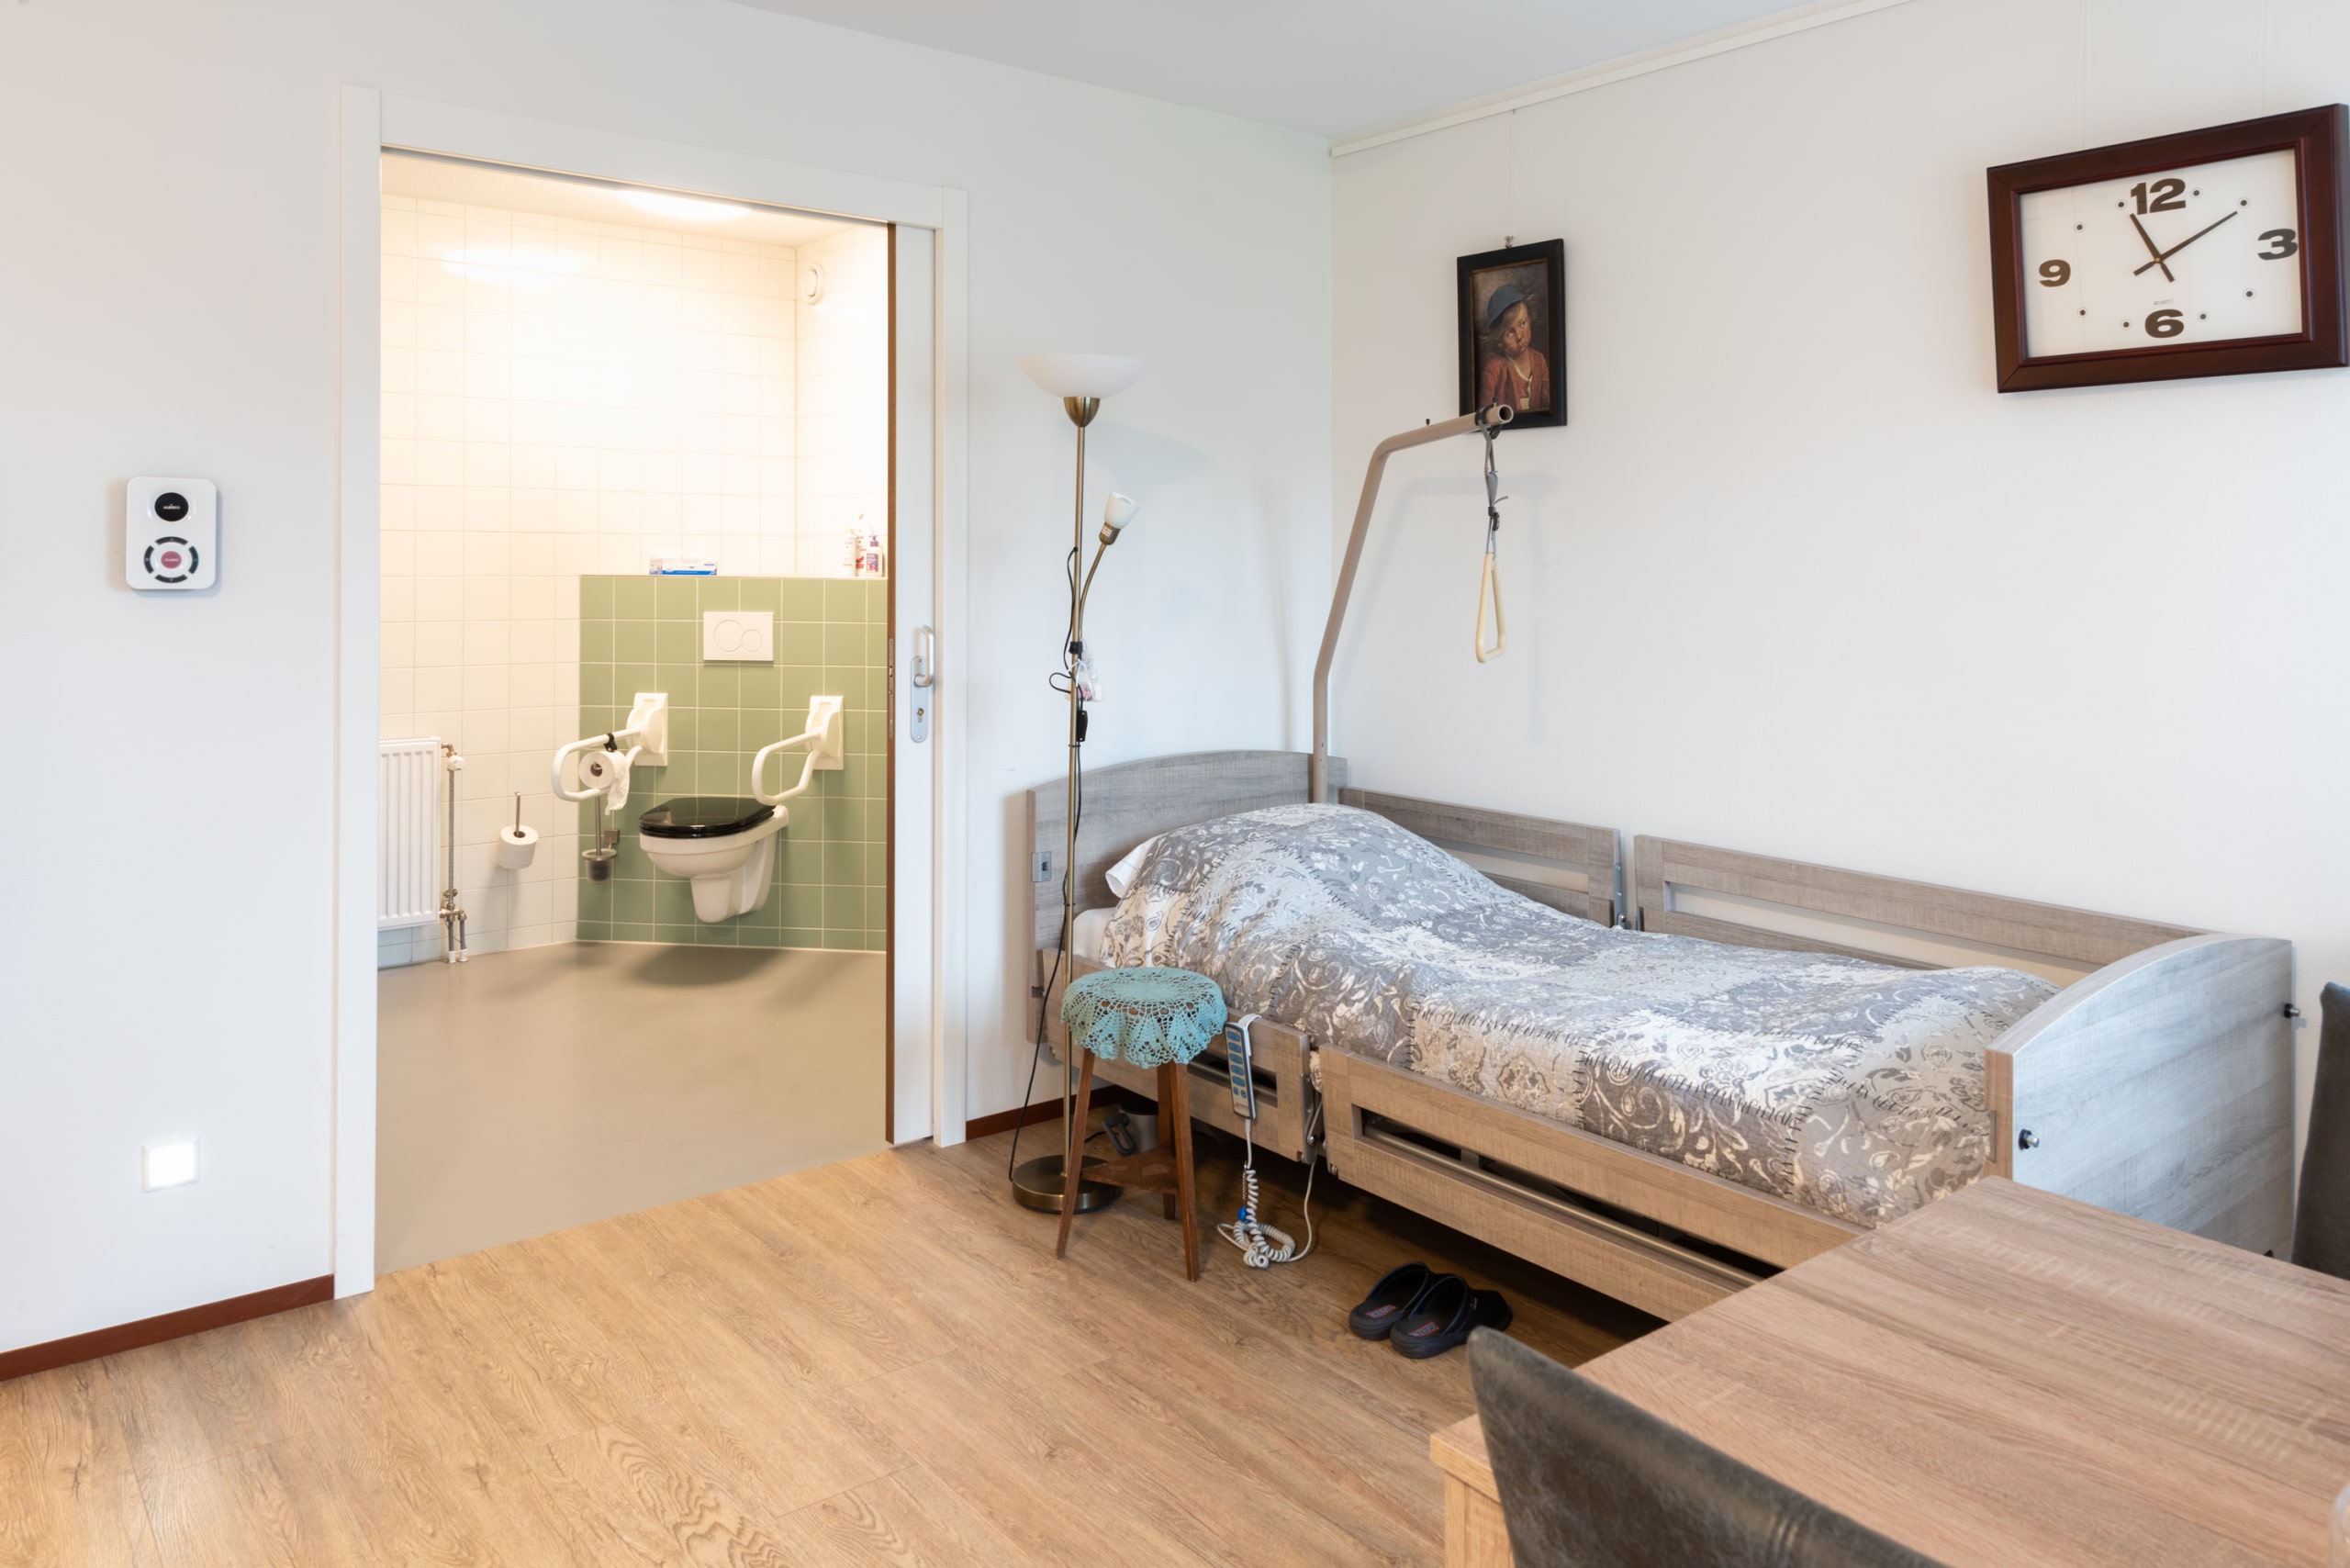 Dr Jenny PG appartement Veensgracht 2 scaled